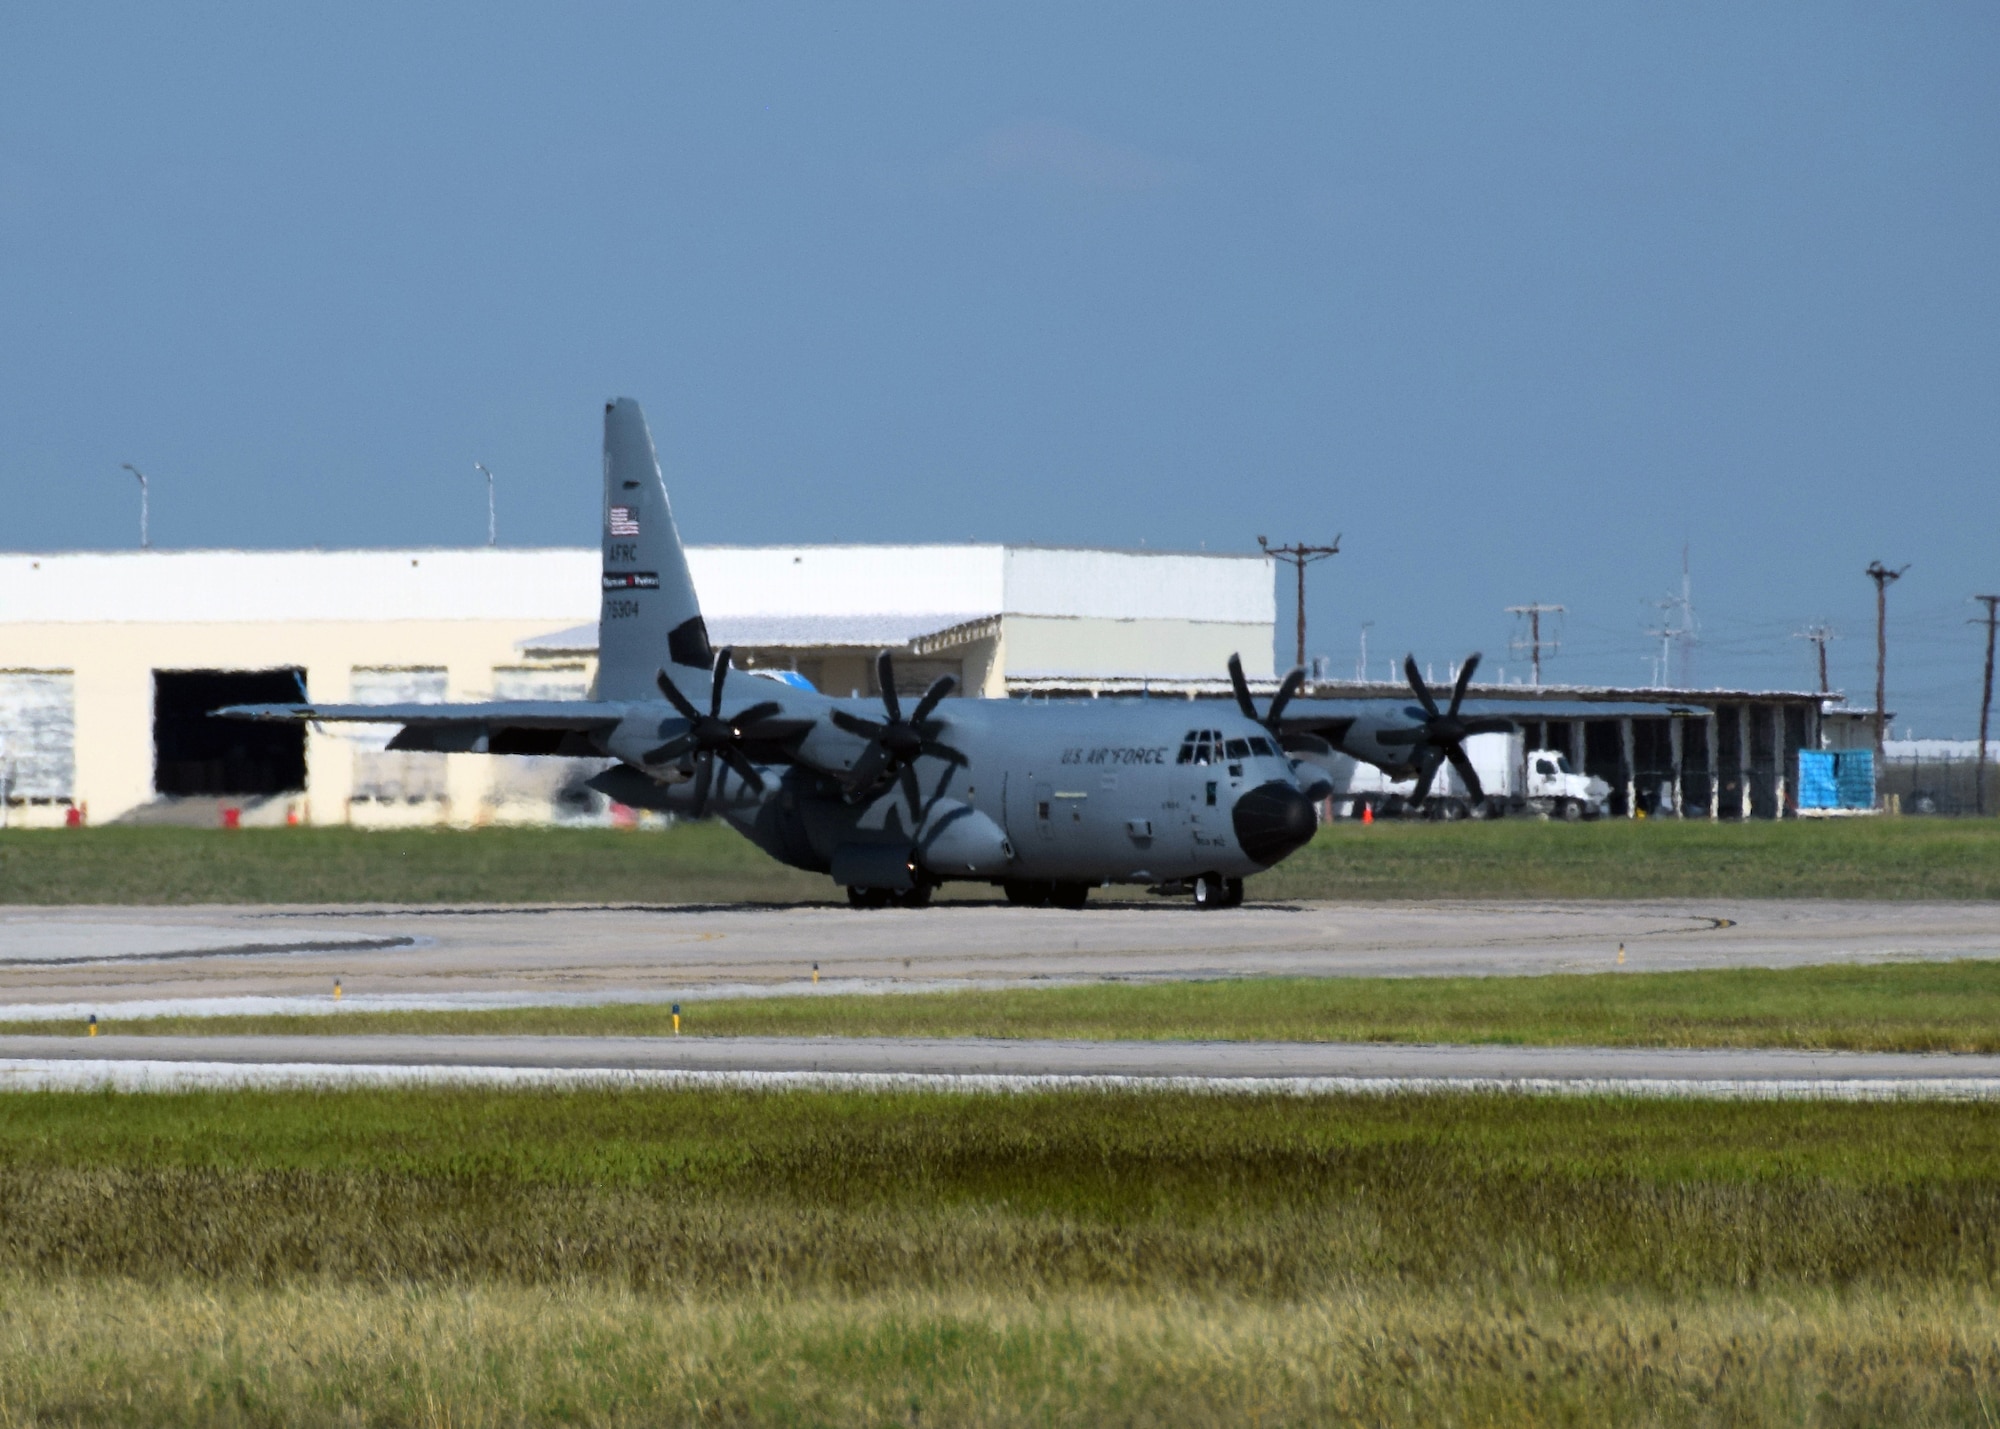 A WC-130J Hercules “Hurricane Hunter” weather reconnaissance aircraft from the 403rd Wing at Keesler Air Force Base, Mississippi, taxis to a parking spot on the 433rd Airlift Wing ramp at Joint Base San Antonio-Lackland, Texas Oct. 6, 2020.